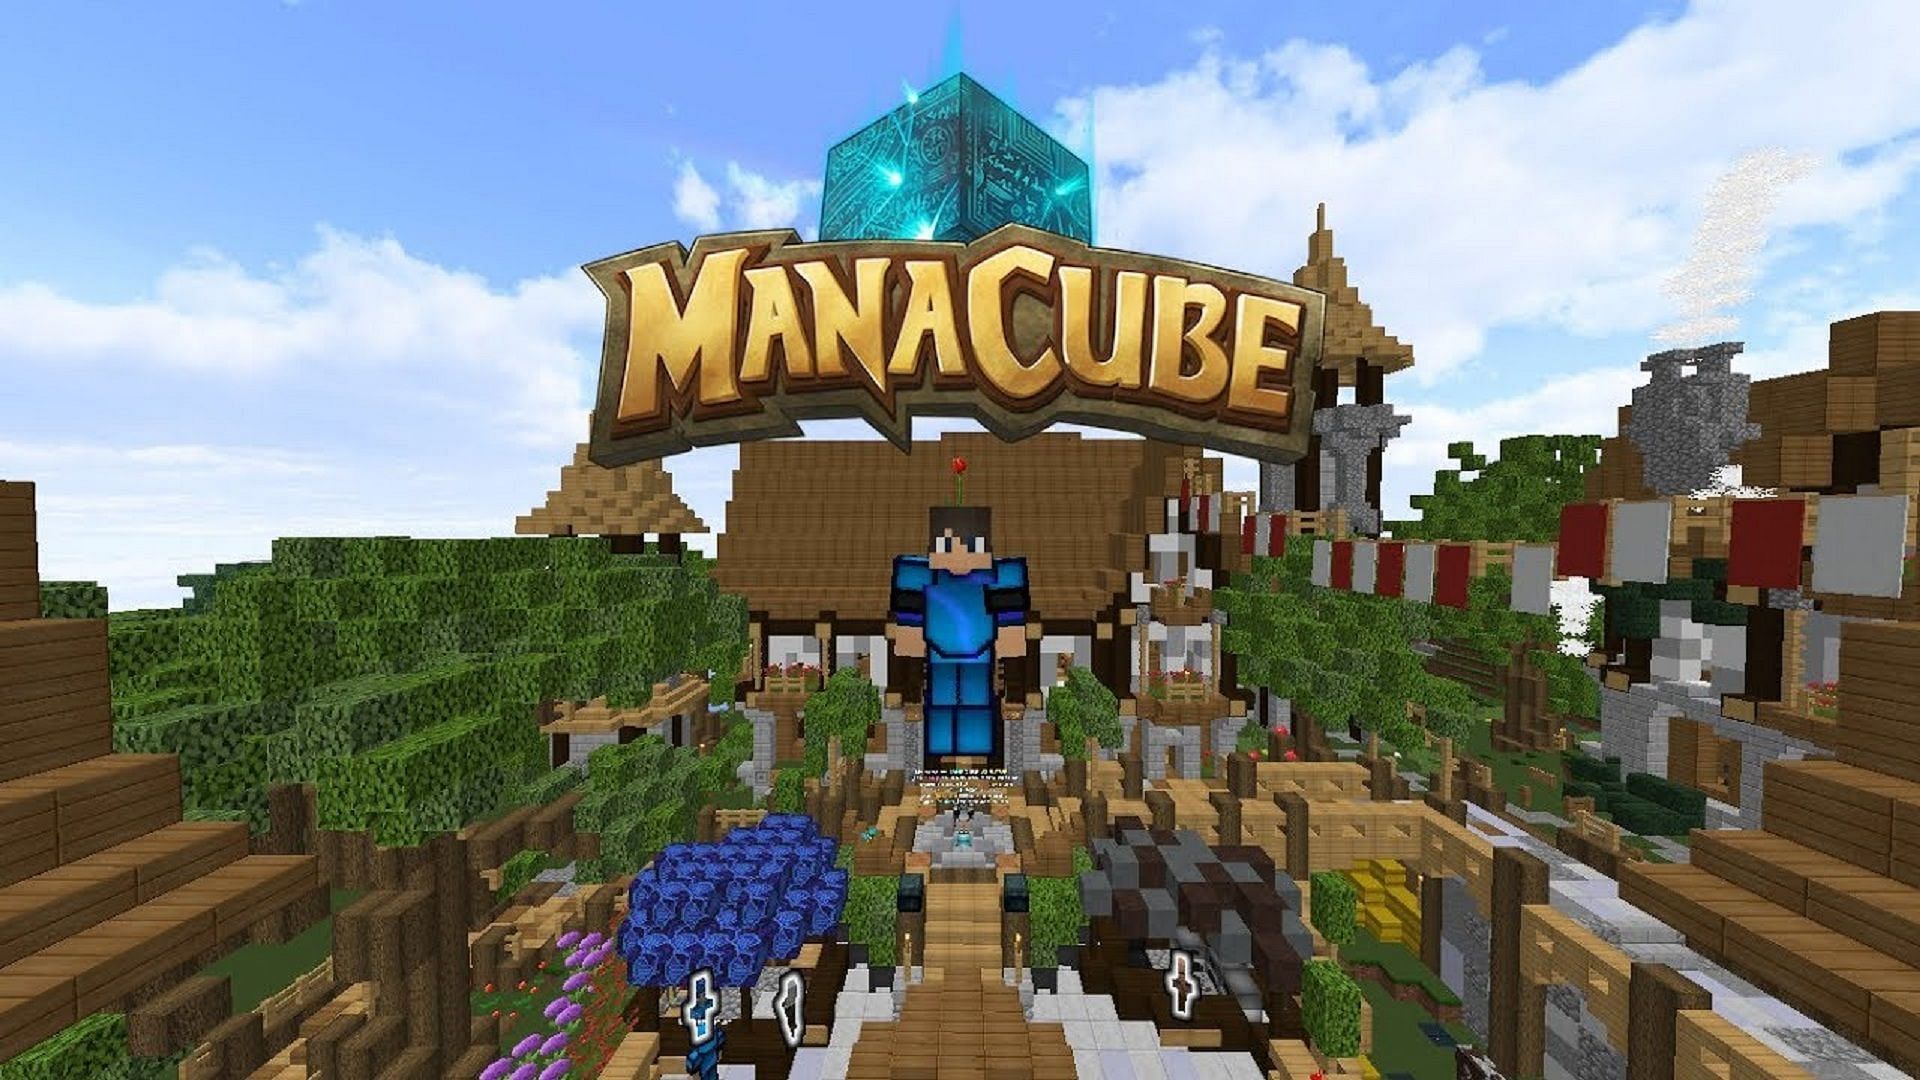 A player screenshot on Manacube (Image via HyDr0KT/YouTube)